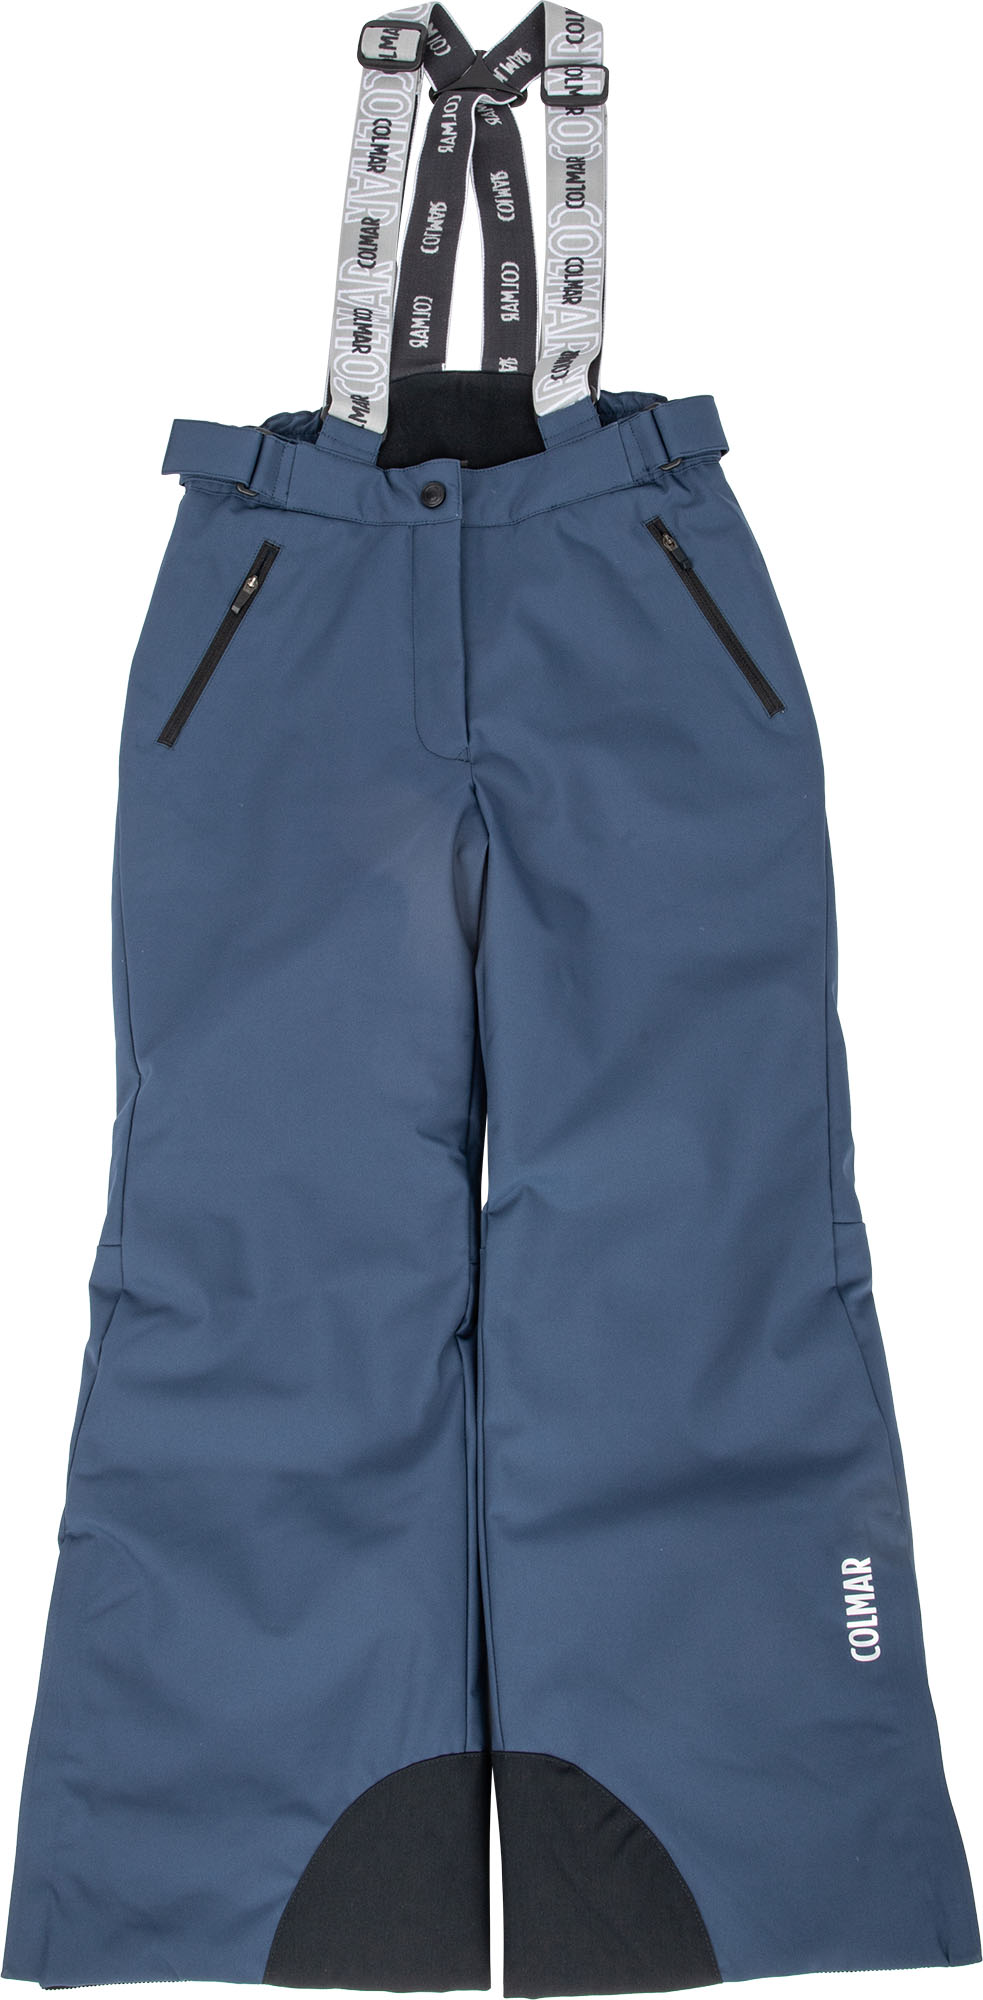 Girls’ ski trousers with suspenders